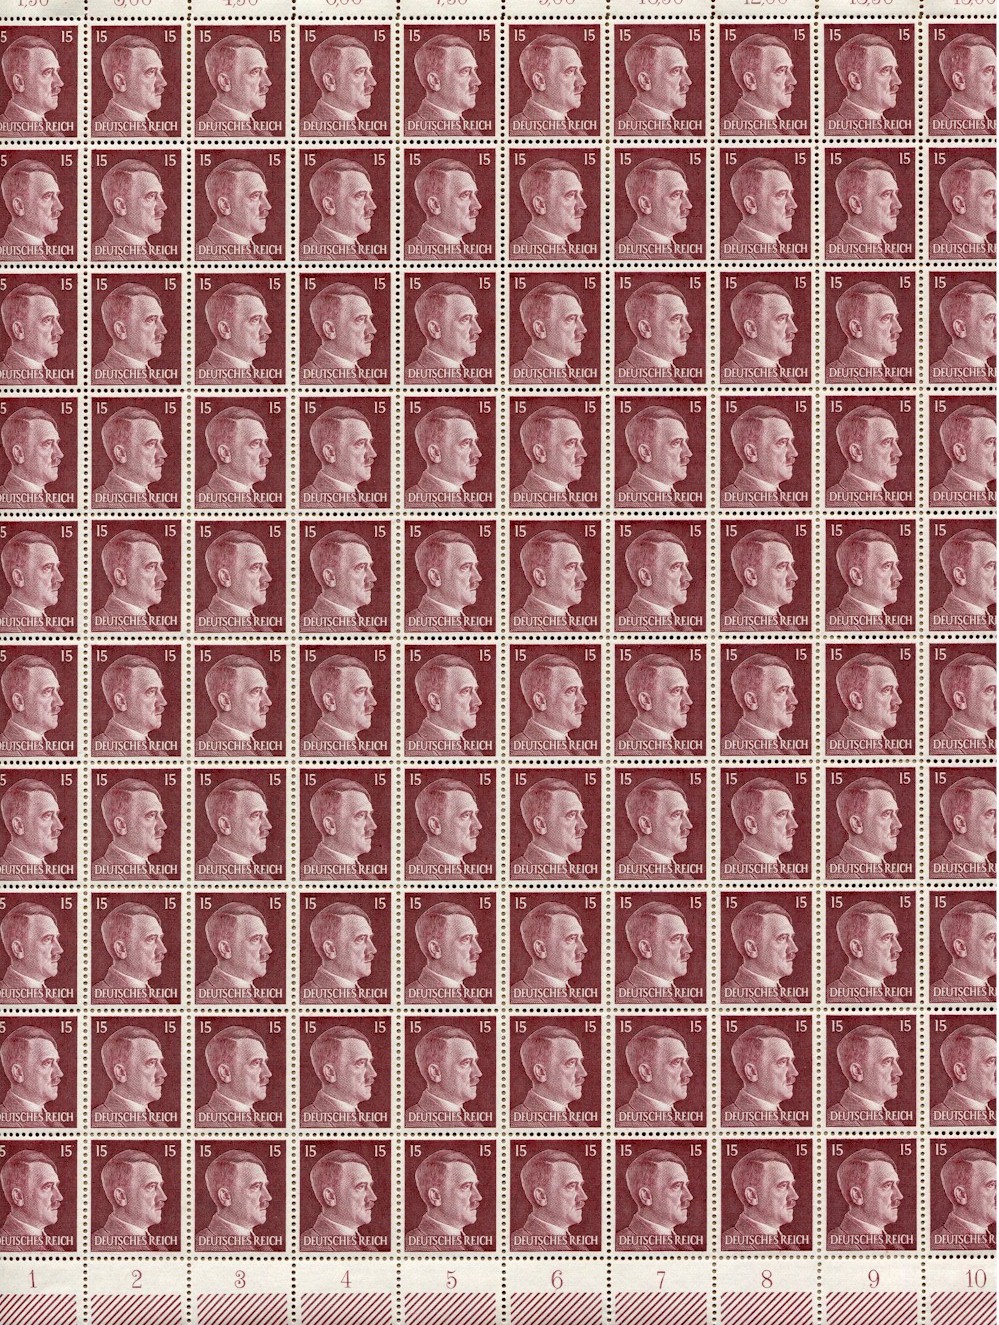 FULL AND COMPLETE GERMAN WWII HITLER HEAD STAMP SHEET OF 100 STAMPS 15 RPF VALUE